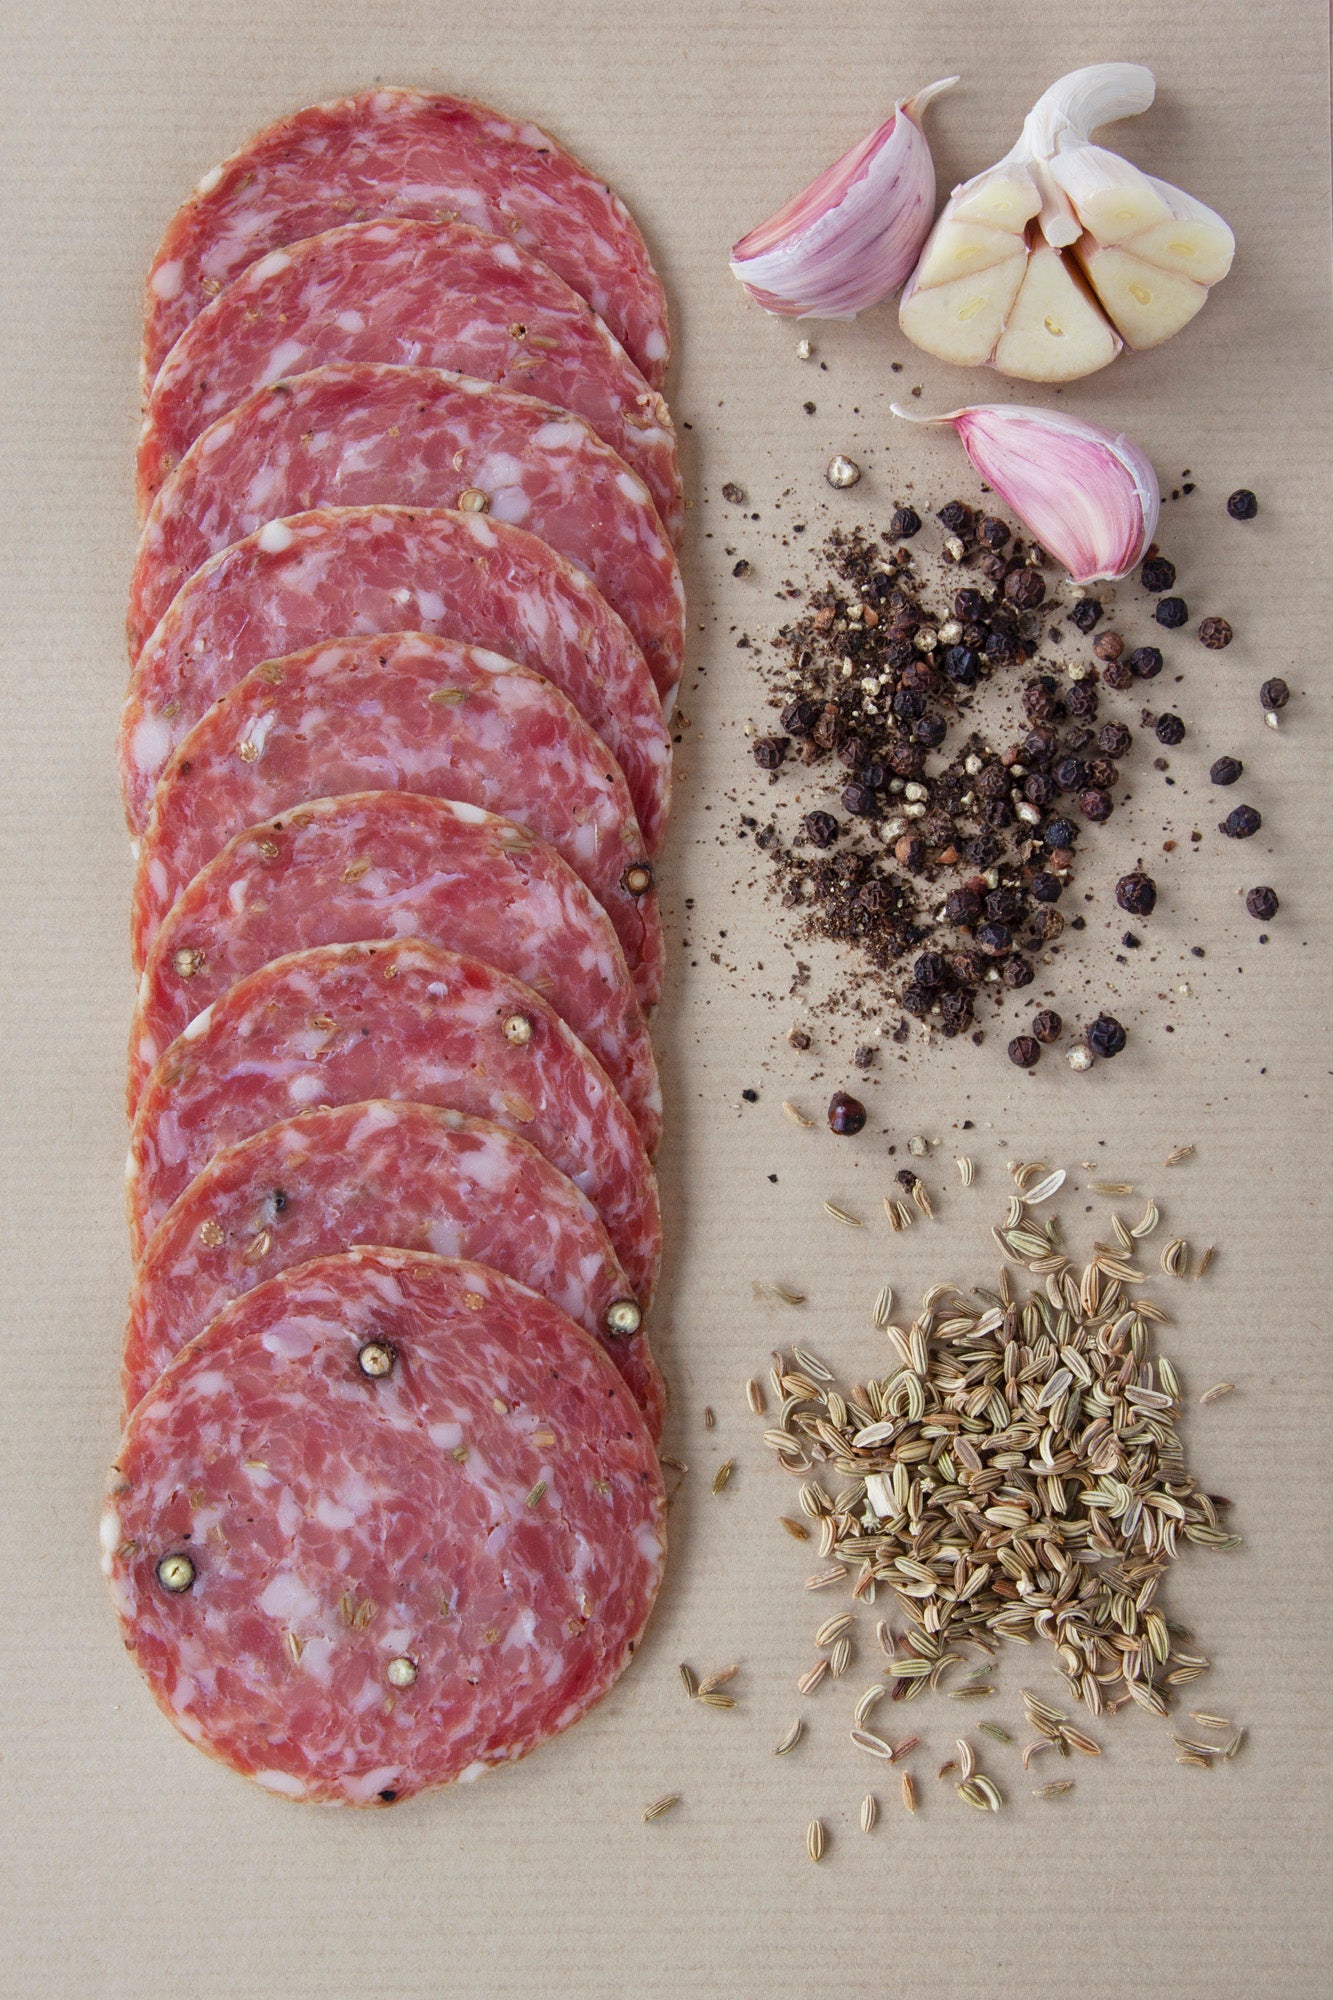 Marsh Pig Charcuterie Selection Pack [Sliced] - 100g